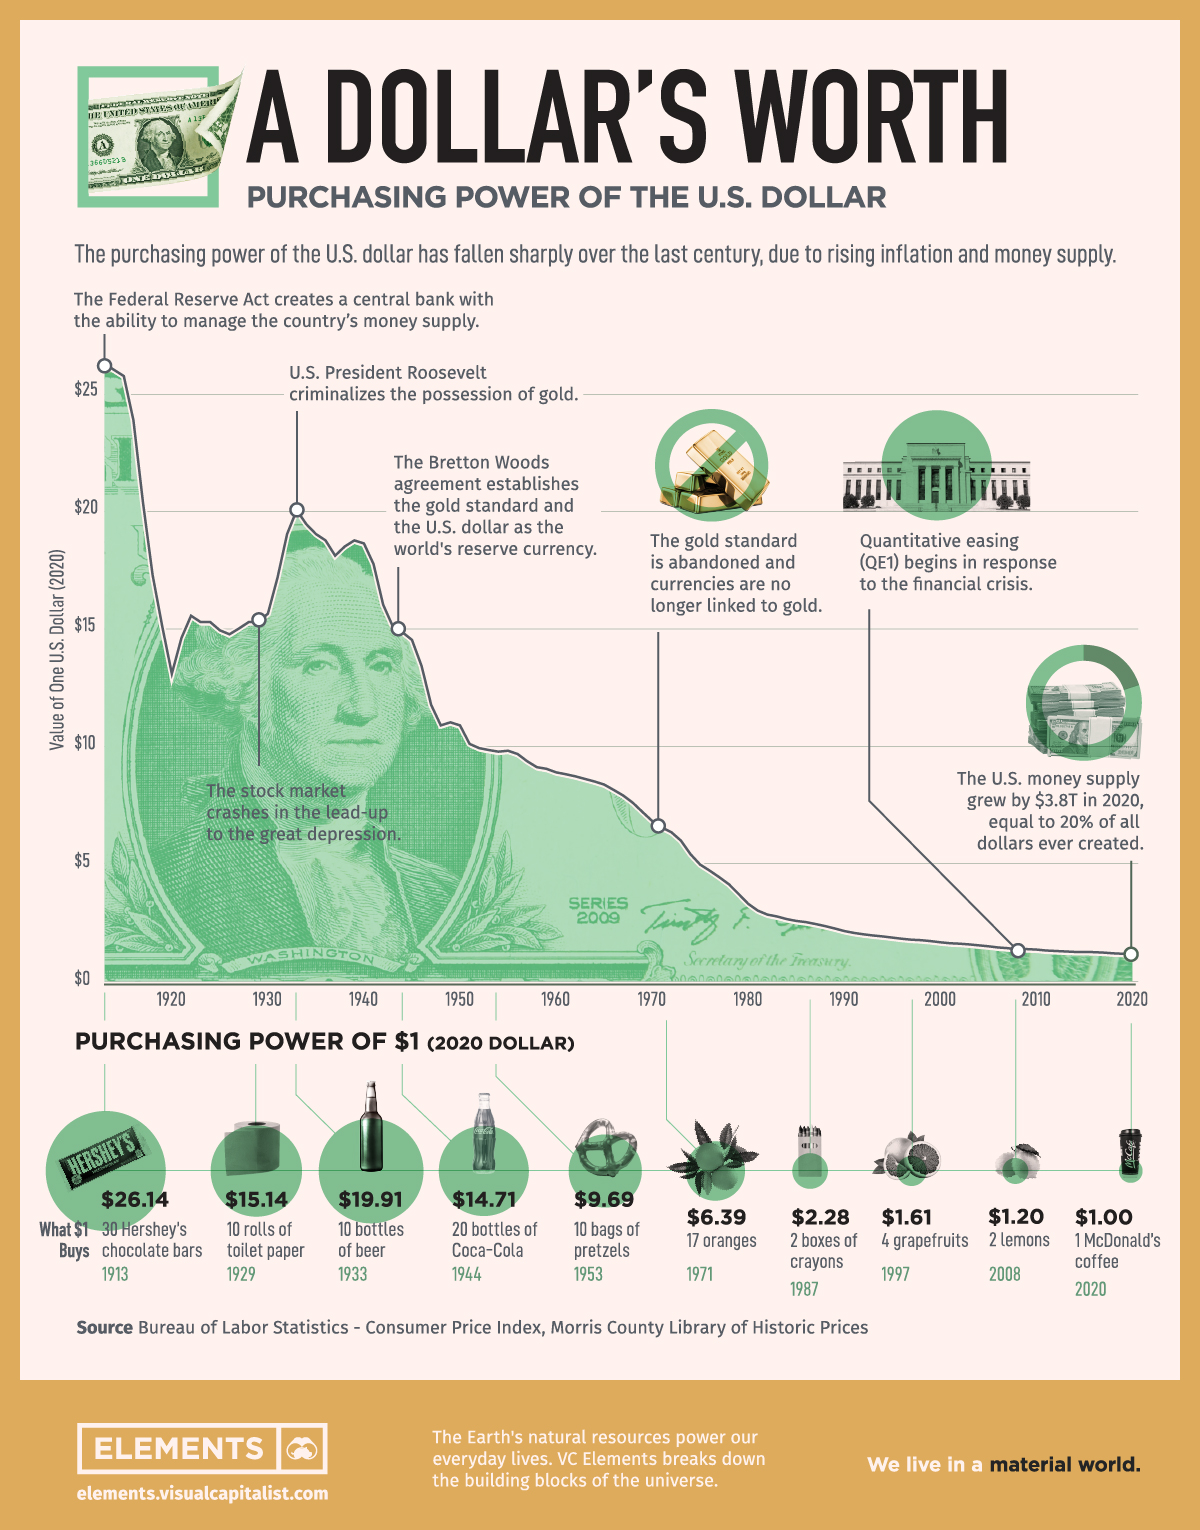 VCE Purchasing Power of the US Dollar